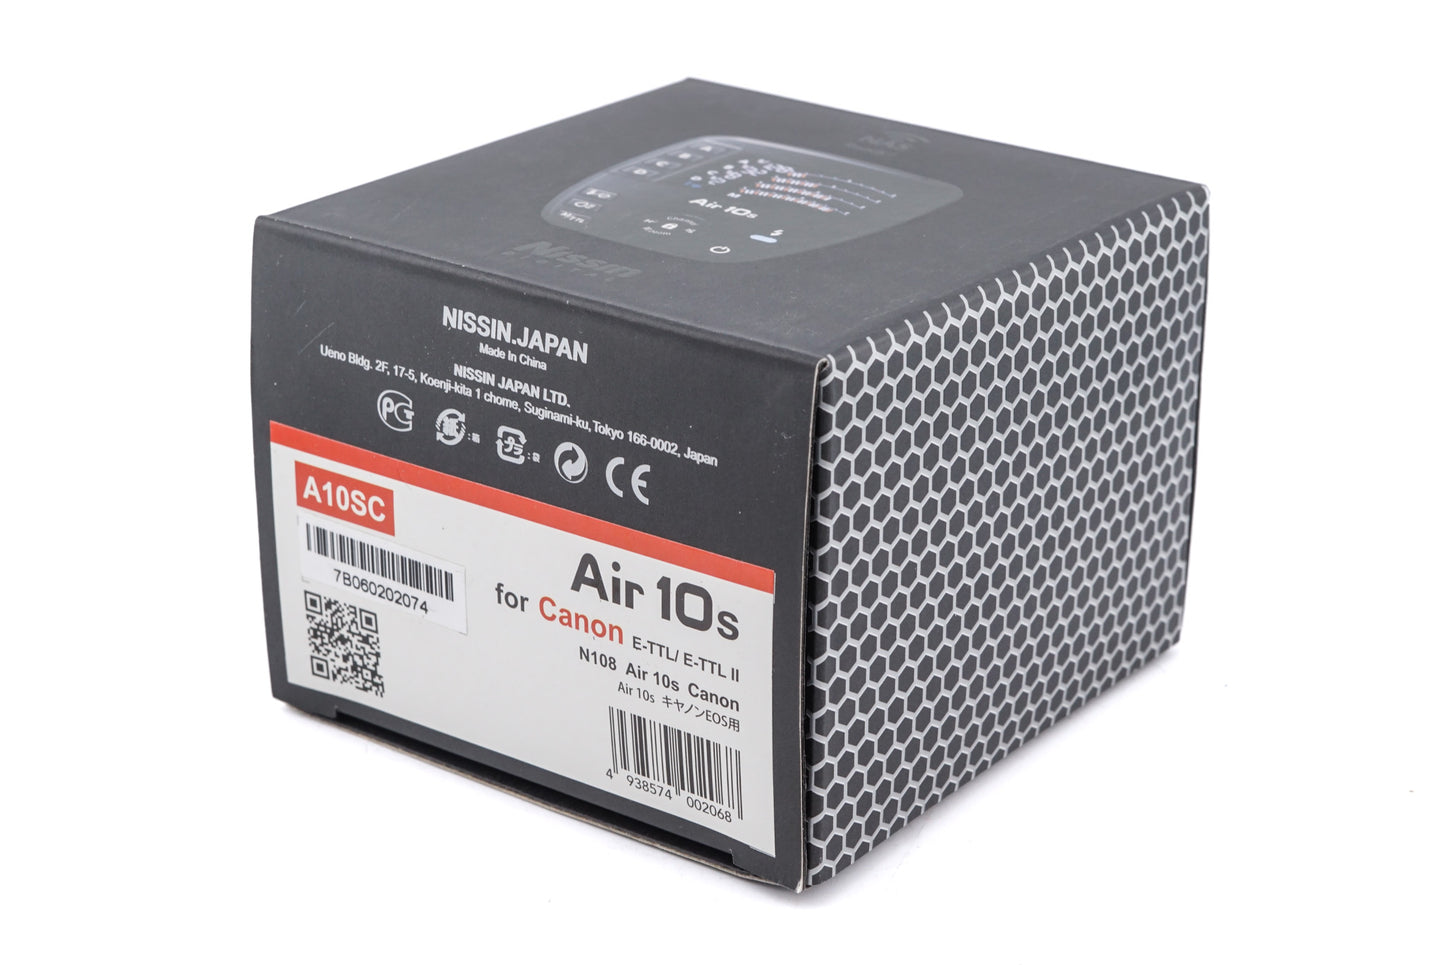 Nissin Air 10s